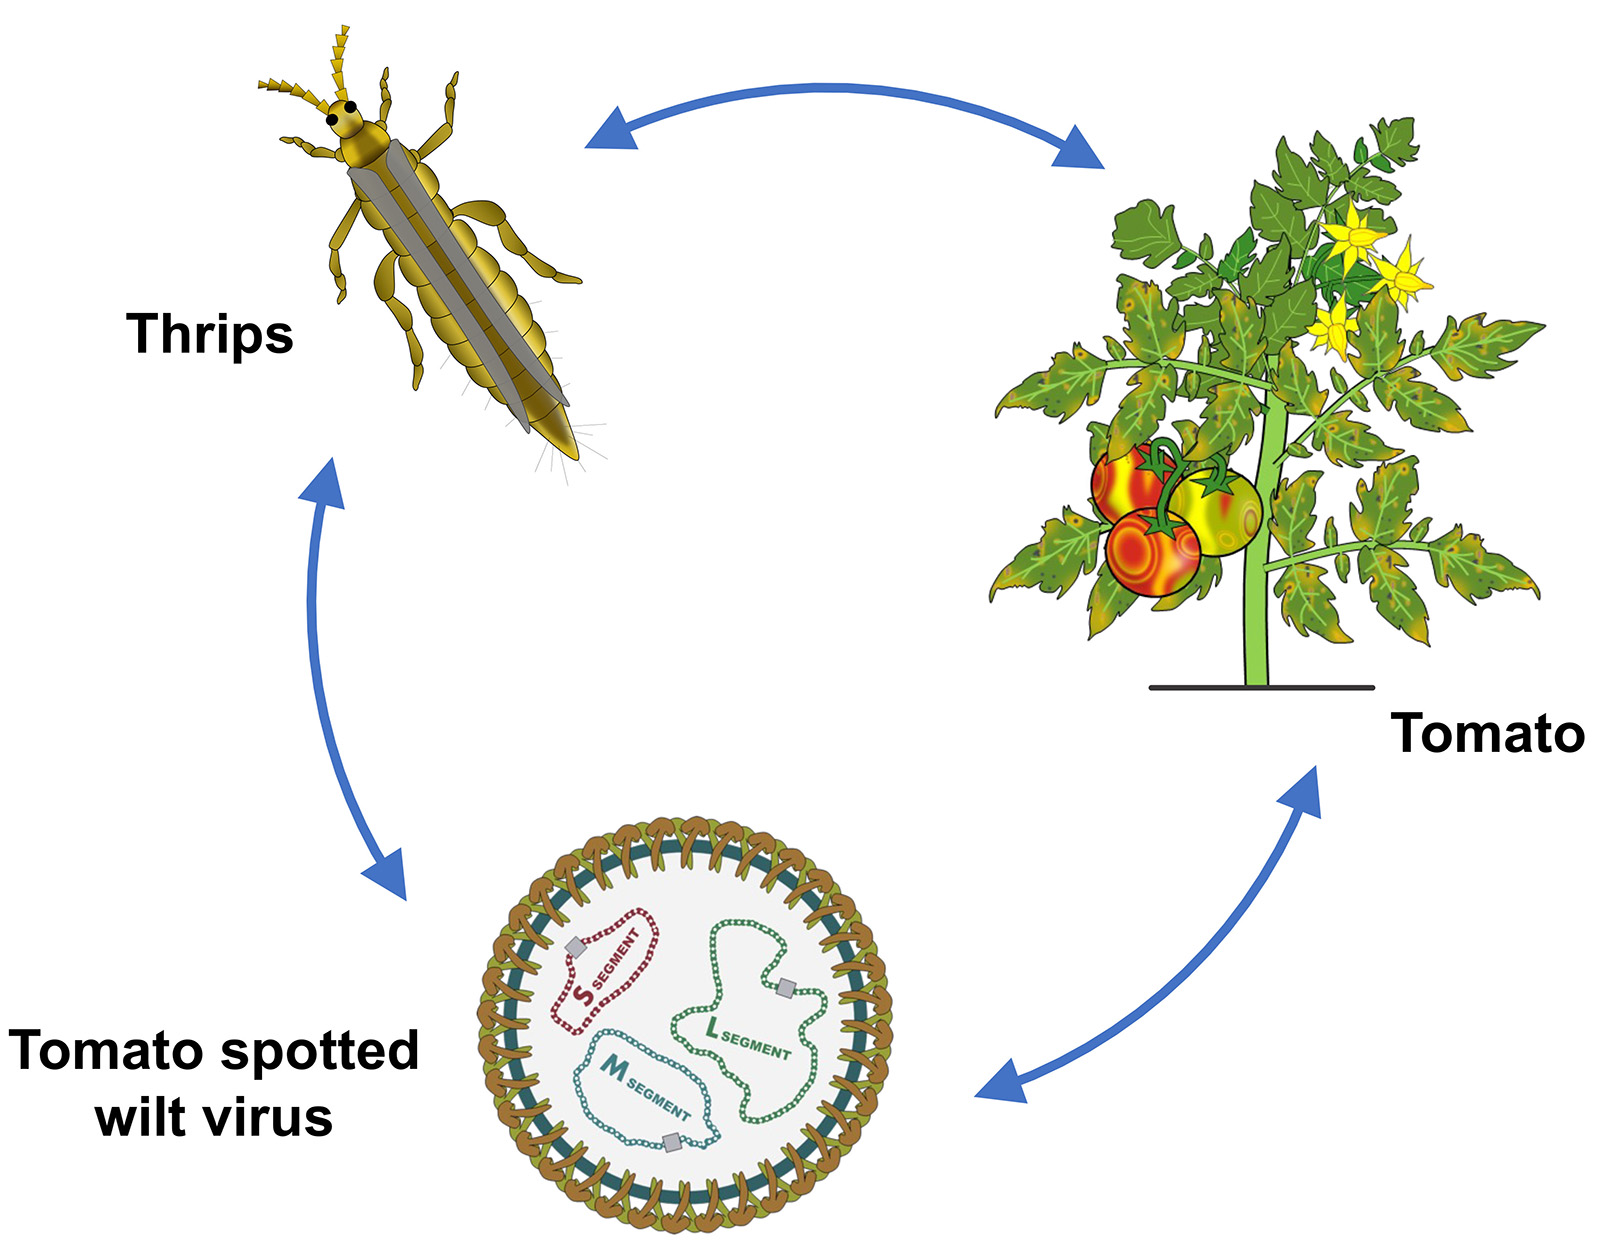 Thrips-Transmitted Tomato Spotted Wilt Virus